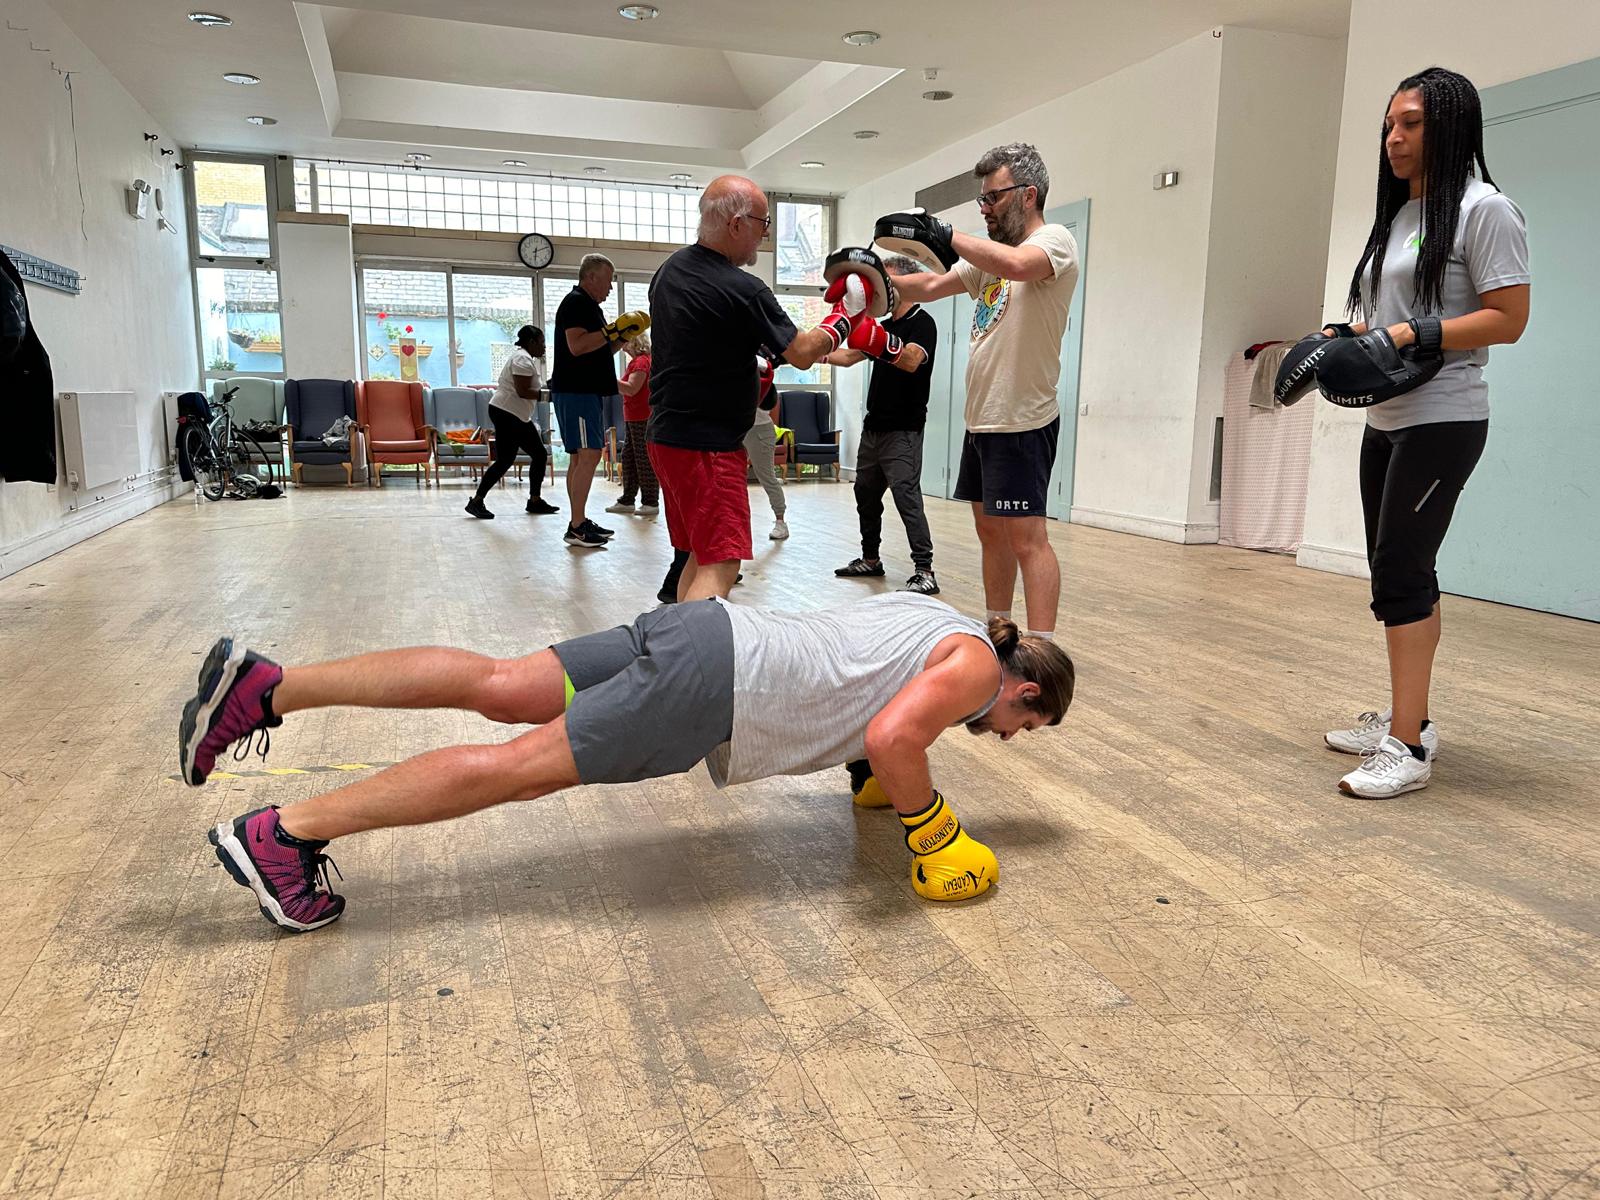 FREE - Boxing Fitness for Adults with/at risk of Type 2 Diabetes